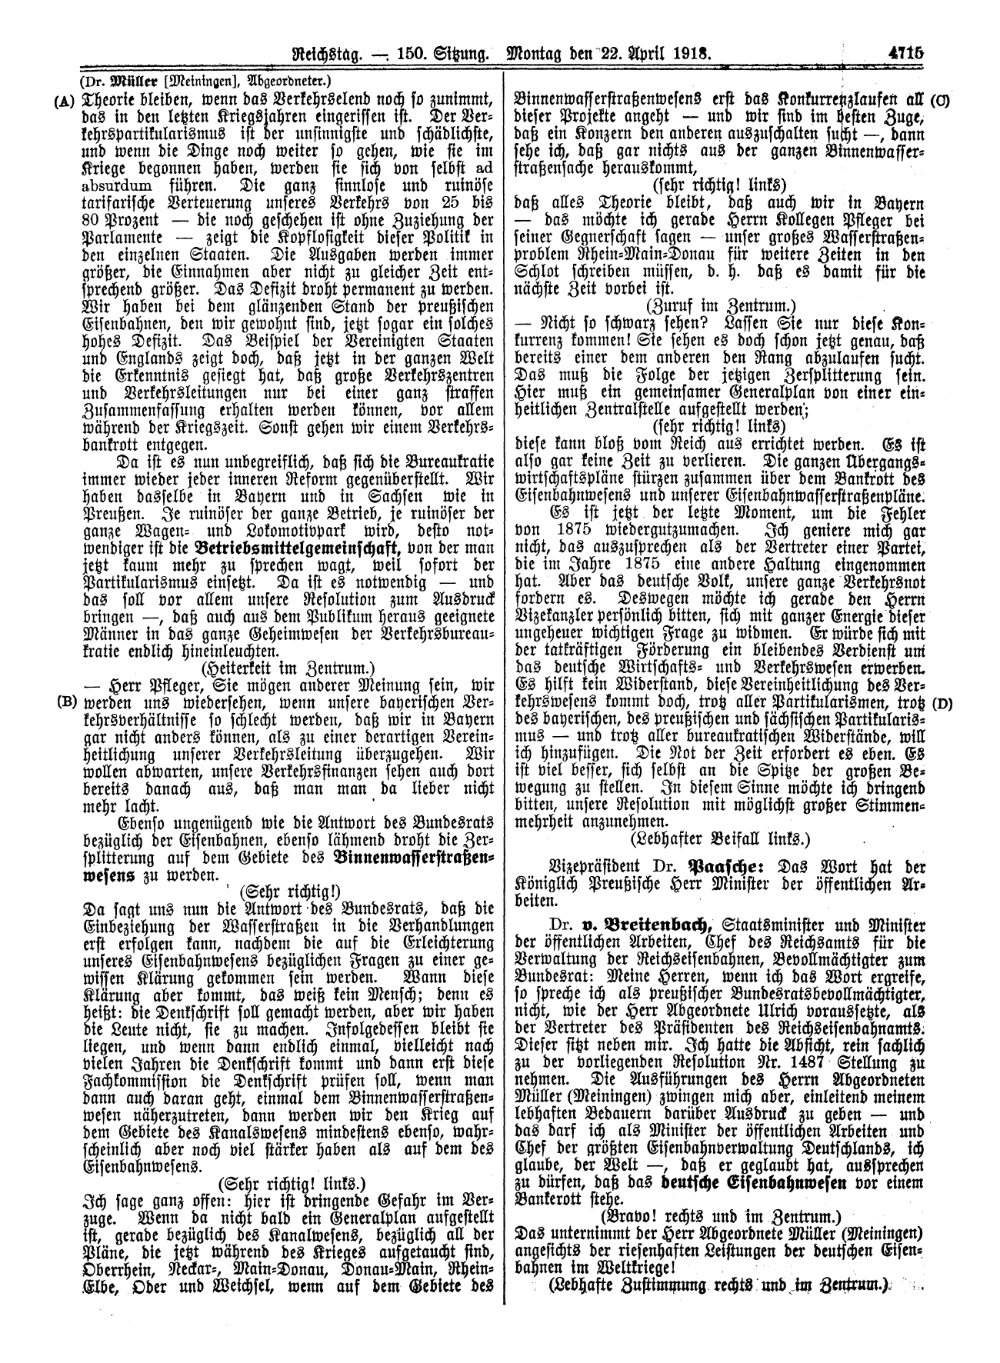 Scan of page 4715